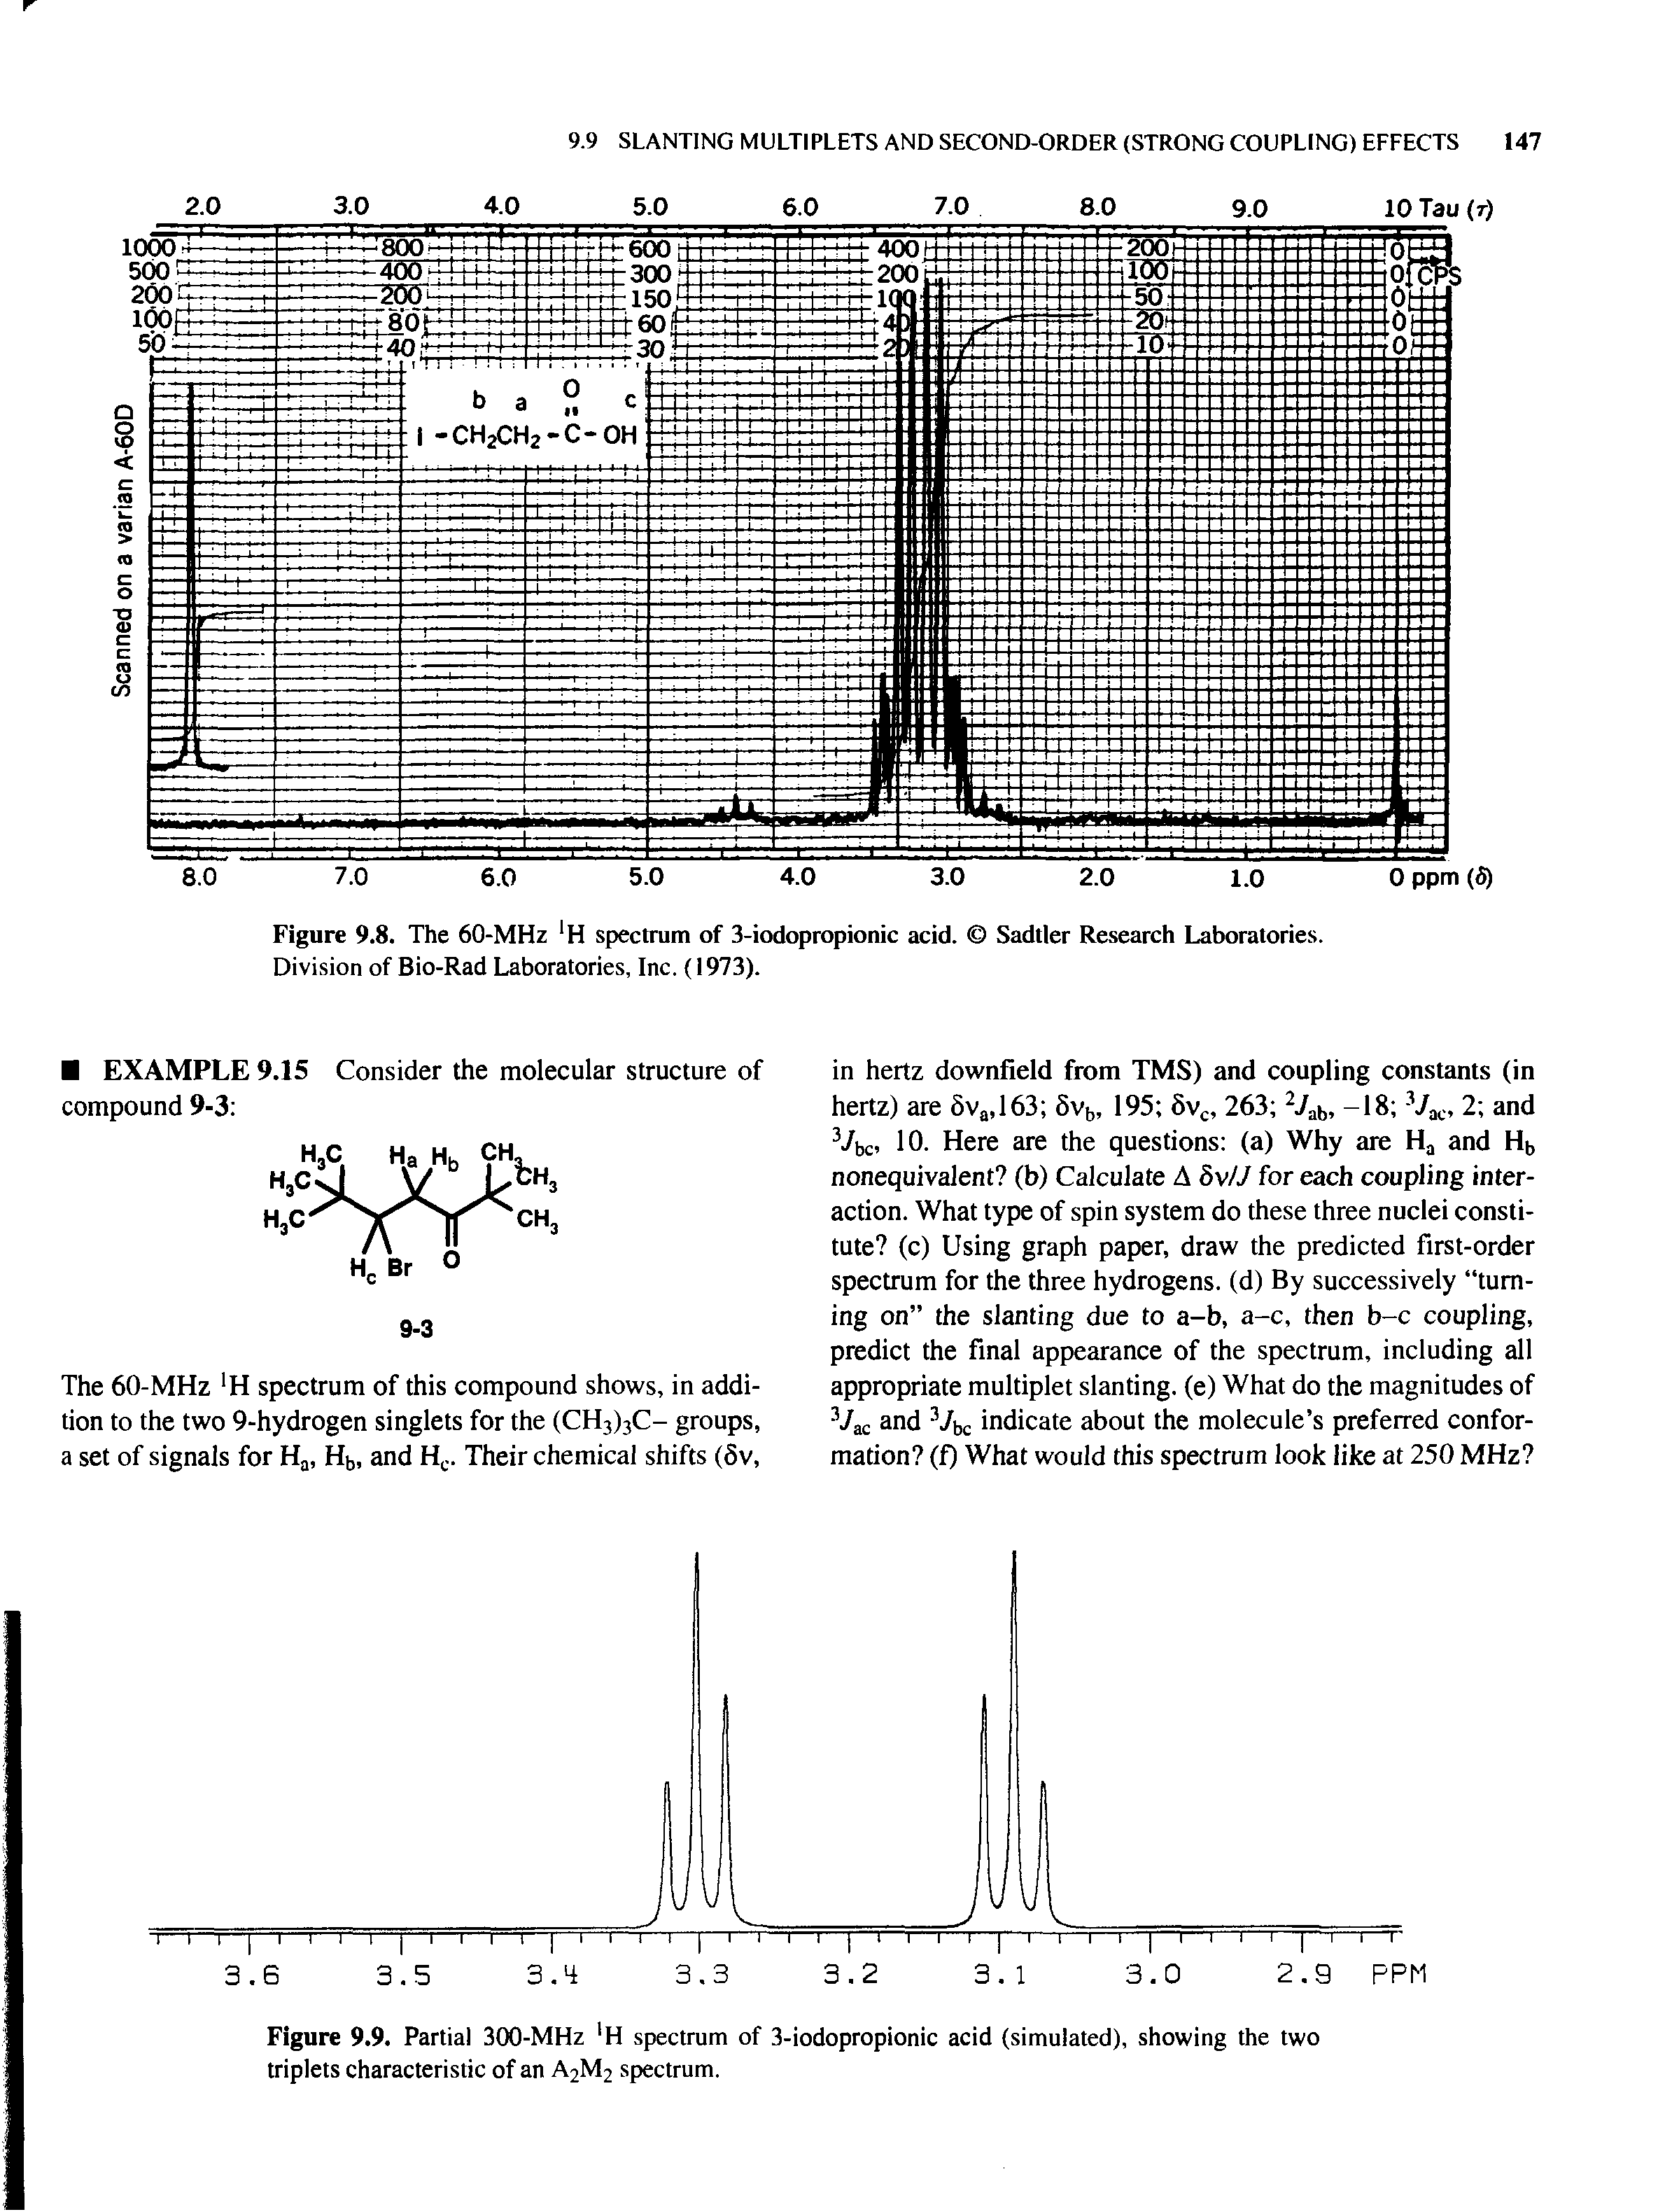 Figure 9.9. Partial 300-MHz H spectrum of 3-iodopropionic acid (simulated), showing the two triplets characteristic of an A2M2 spectrum.